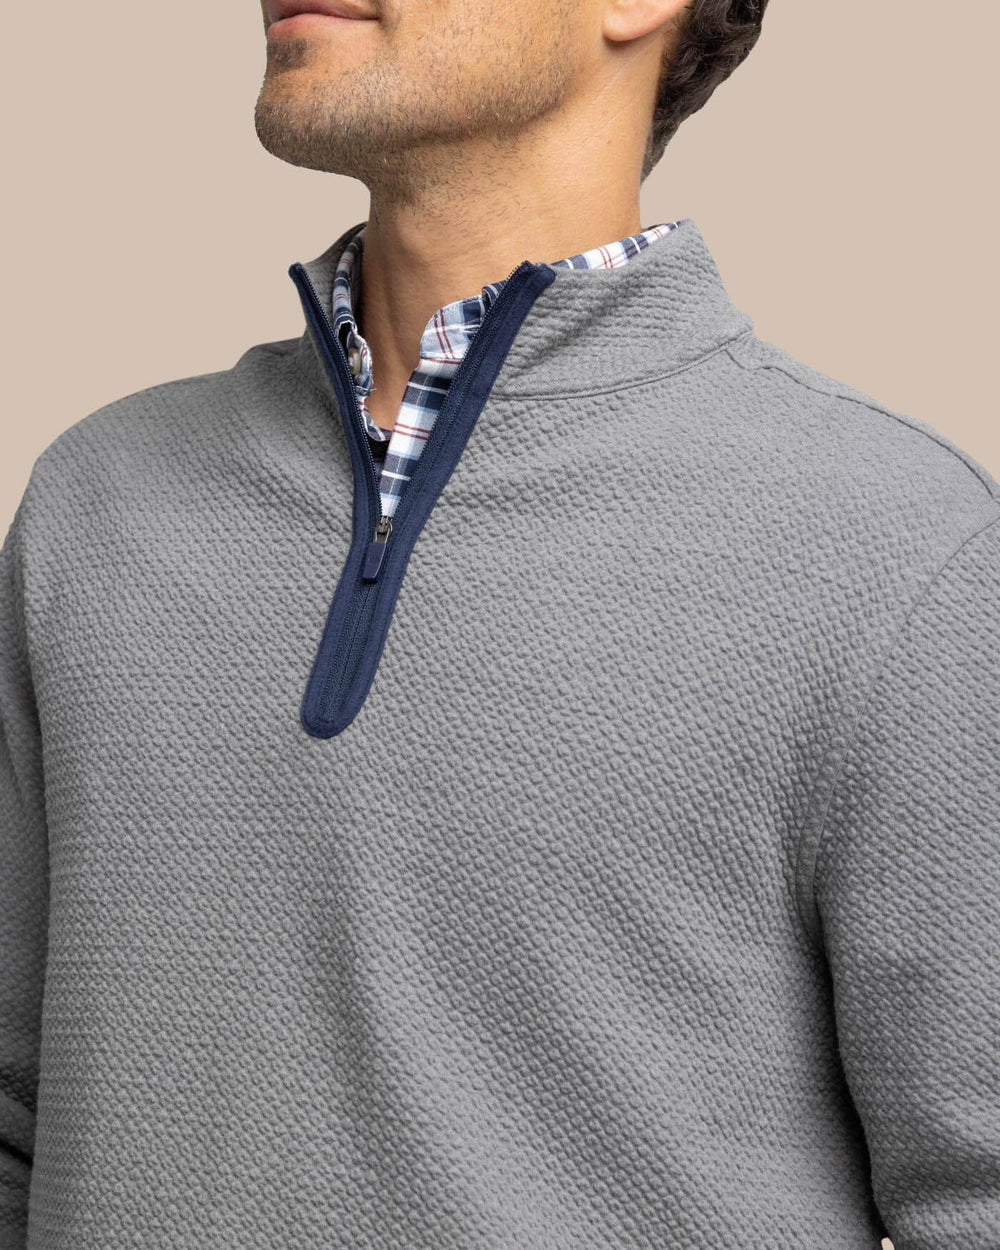 The detail view of the Southern Tide Heather Outbound Quarter Zip by Southern Tide - Heather Shadow Grey